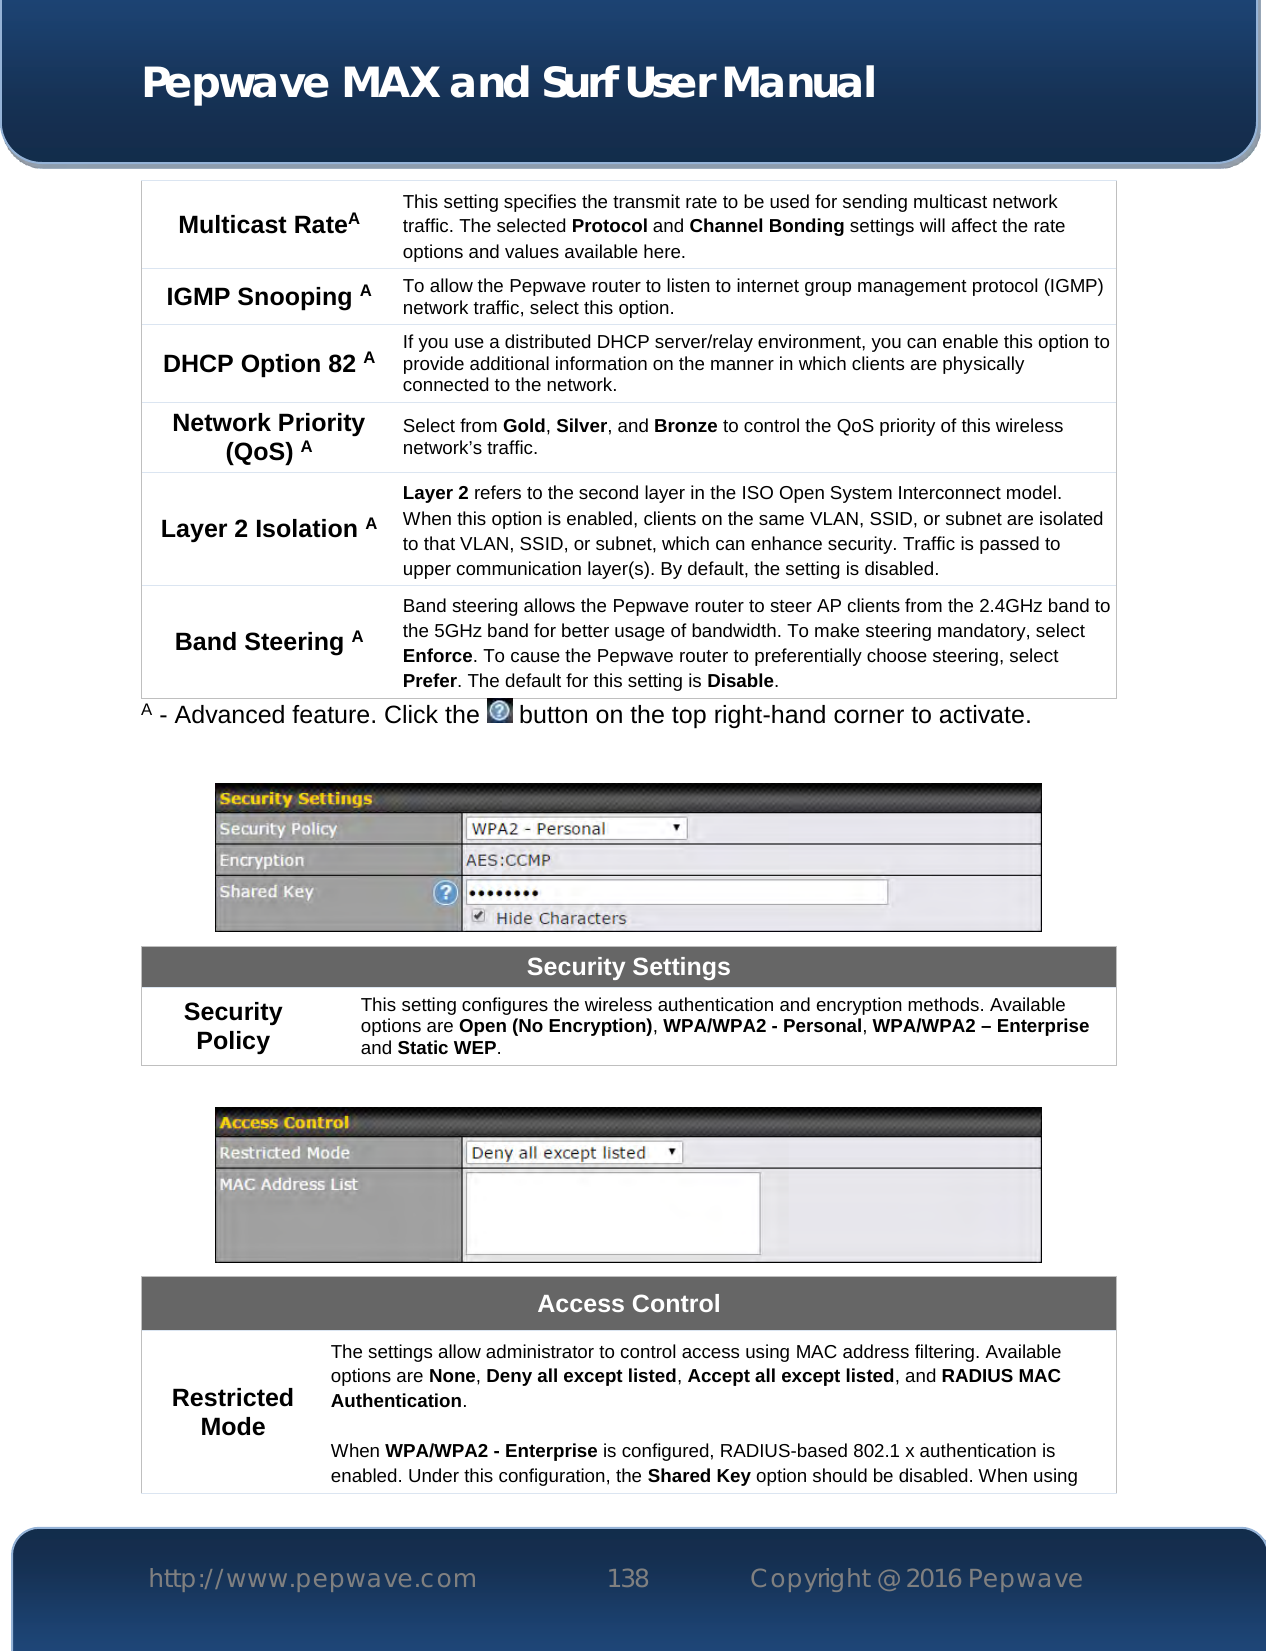  Pepwave MAX and Surf User Manual http://www.pepwave.com 138   Copyright @ 2016 Pepwave   Multicast RateA This setting specifies the transmit rate to be used for sending multicast network traffic. The selected Protocol and Channel Bonding settings will affect the rate options and values available here. IGMP Snooping A To allow the Pepwave router to listen to internet group management protocol (IGMP) network traffic, select this option. DHCP Option 82 A If you use a distributed DHCP server/relay environment, you can enable this option to provide additional information on the manner in which clients are physically connected to the network. Network Priority (QoS) A Select from Gold, Silver, and Bronze to control the QoS priority of this wireless network’s traffic. Layer 2 Isolation A Layer 2 refers to the second layer in the ISO Open System Interconnect model. When this option is enabled, clients on the same VLAN, SSID, or subnet are isolated to that VLAN, SSID, or subnet, which can enhance security. Traffic is passed to upper communication layer(s). By default, the setting is disabled.  Band Steering A Band steering allows the Pepwave router to steer AP clients from the 2.4GHz band to the 5GHz band for better usage of bandwidth. To make steering mandatory, select Enforce. To cause the Pepwave router to preferentially choose steering, select Prefer. The default for this setting is Disable. A - Advanced feature. Click the   button on the top right-hand corner to activate.   Security Settings Security Policy This setting configures the wireless authentication and encryption methods. Available options are Open (No Encryption), WPA/WPA2 - Personal, WPA/WPA2 – Enterprise and Static WEP.   Access Control Restricted Mode The settings allow administrator to control access using MAC address filtering. Available options are None, Deny all except listed, Accept all except listed, and RADIUS MAC Authentication.  When WPA/WPA2 - Enterprise is configured, RADIUS-based 802.1 x authentication is enabled. Under this configuration, the Shared Key option should be disabled. When using 